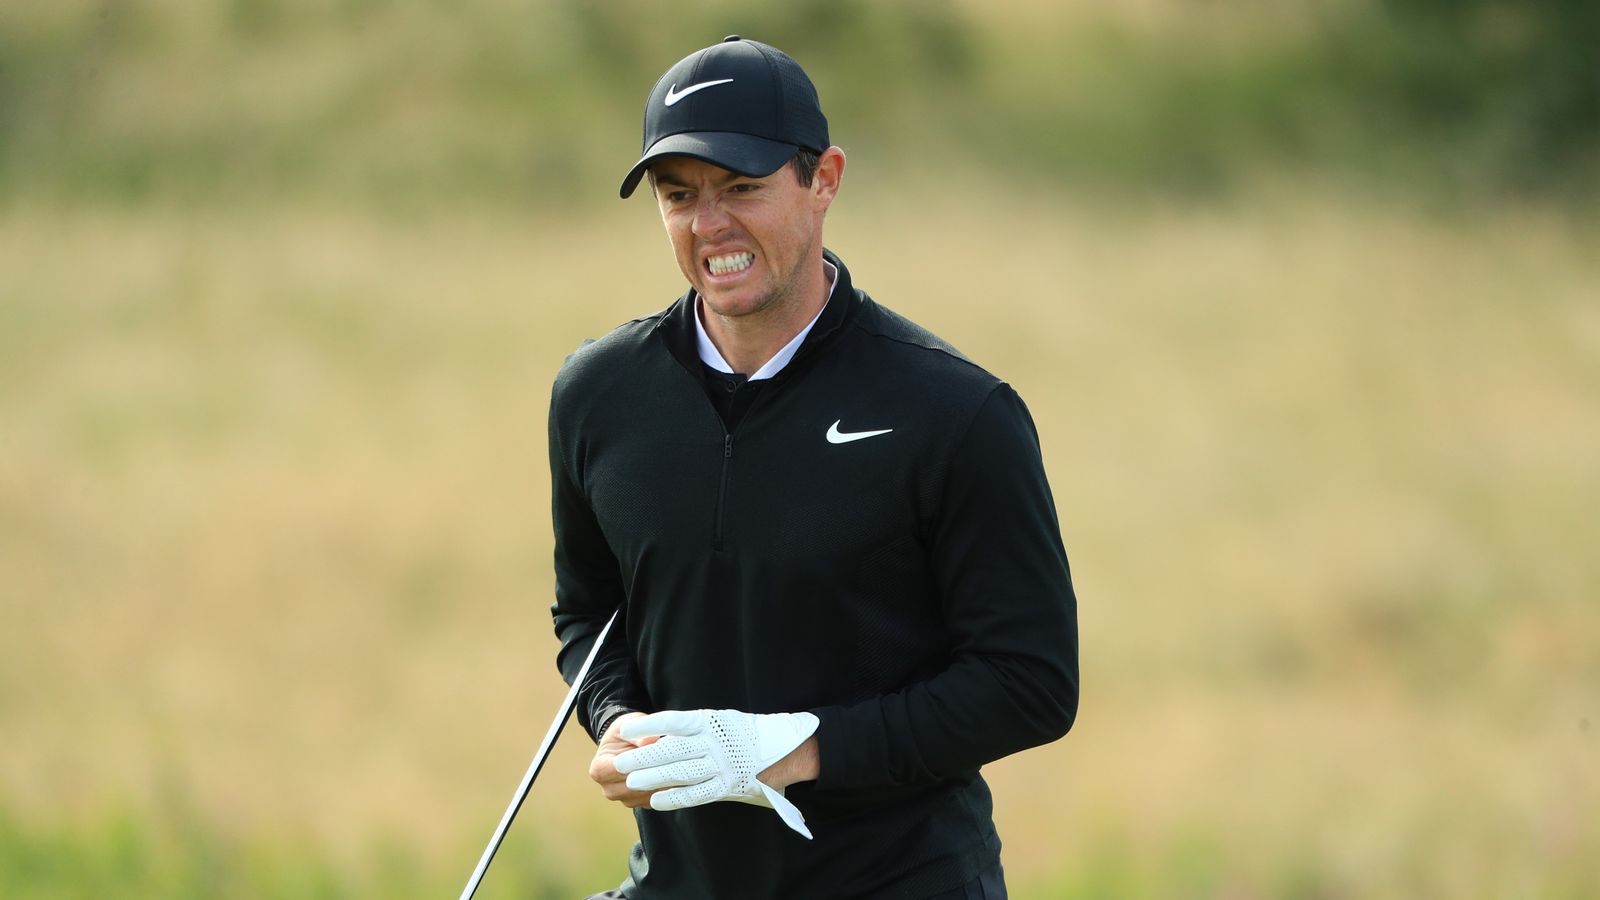 Rory McIlroy struggles at Scottish Open with opening 74 Golf News